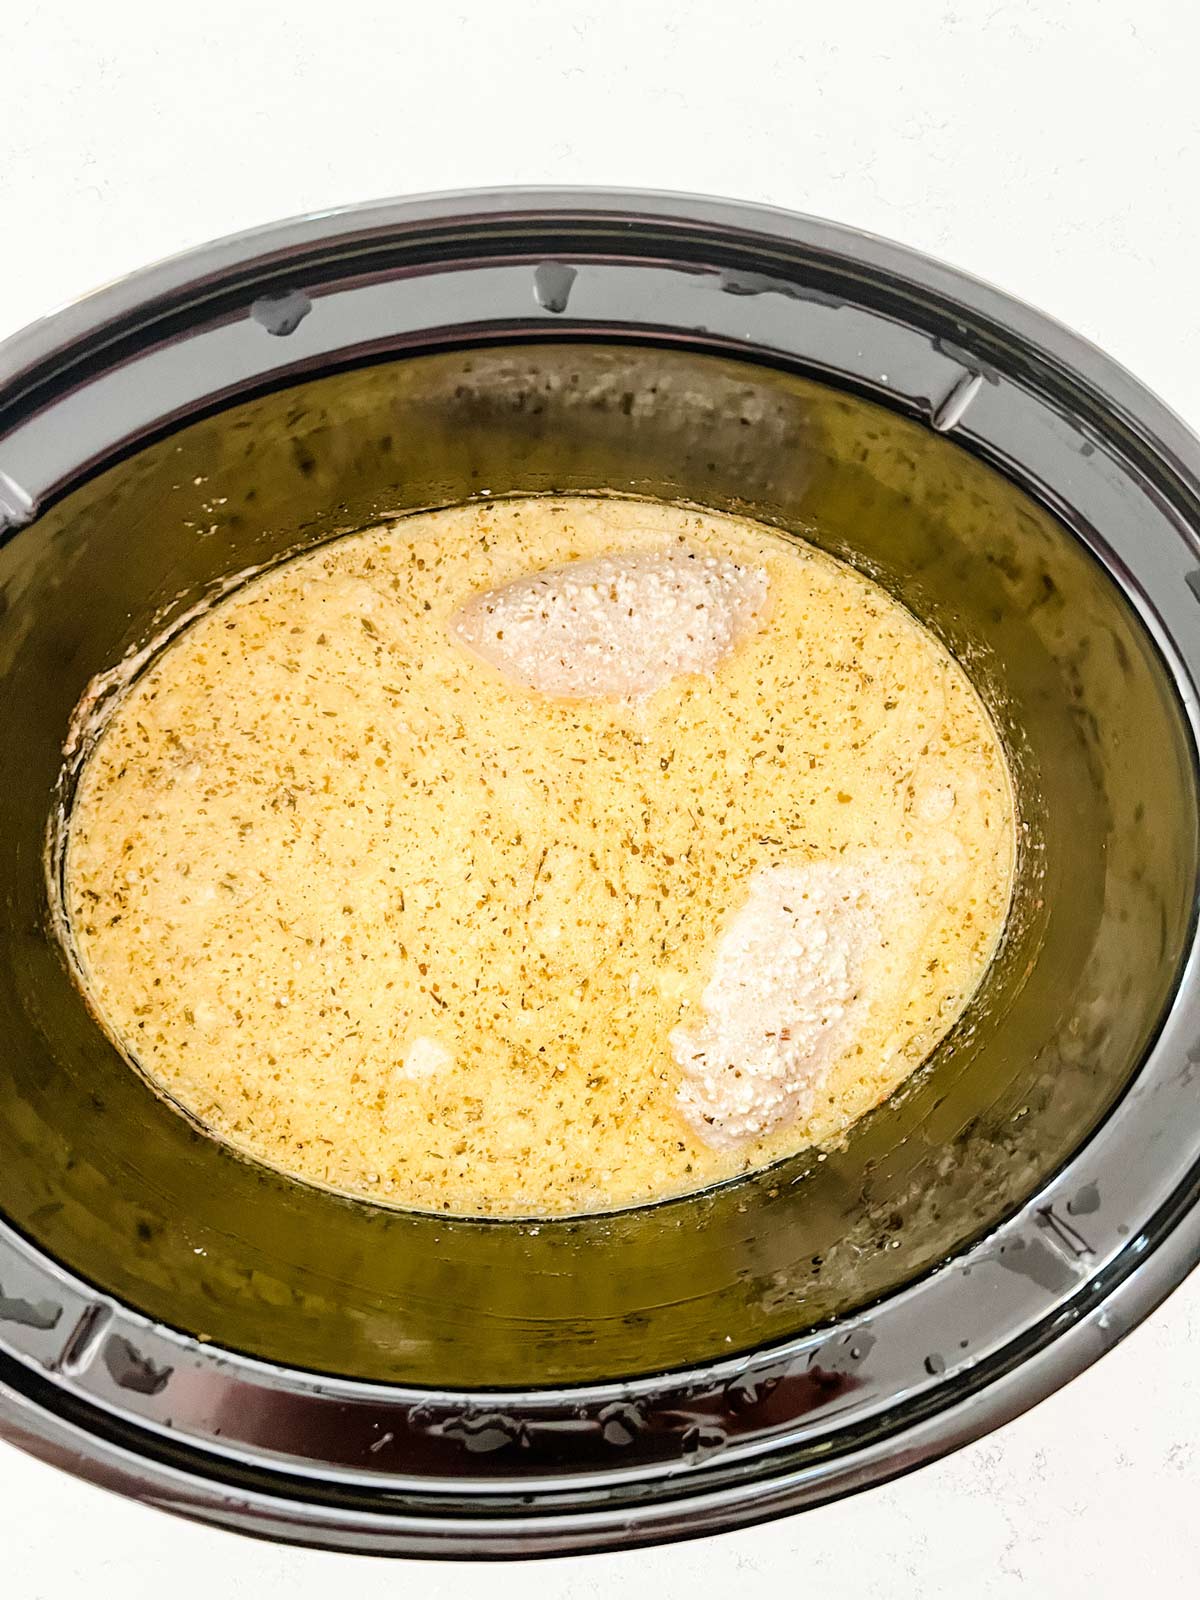 Chicken that has cooked in a creamy sauce in a slow cooker.